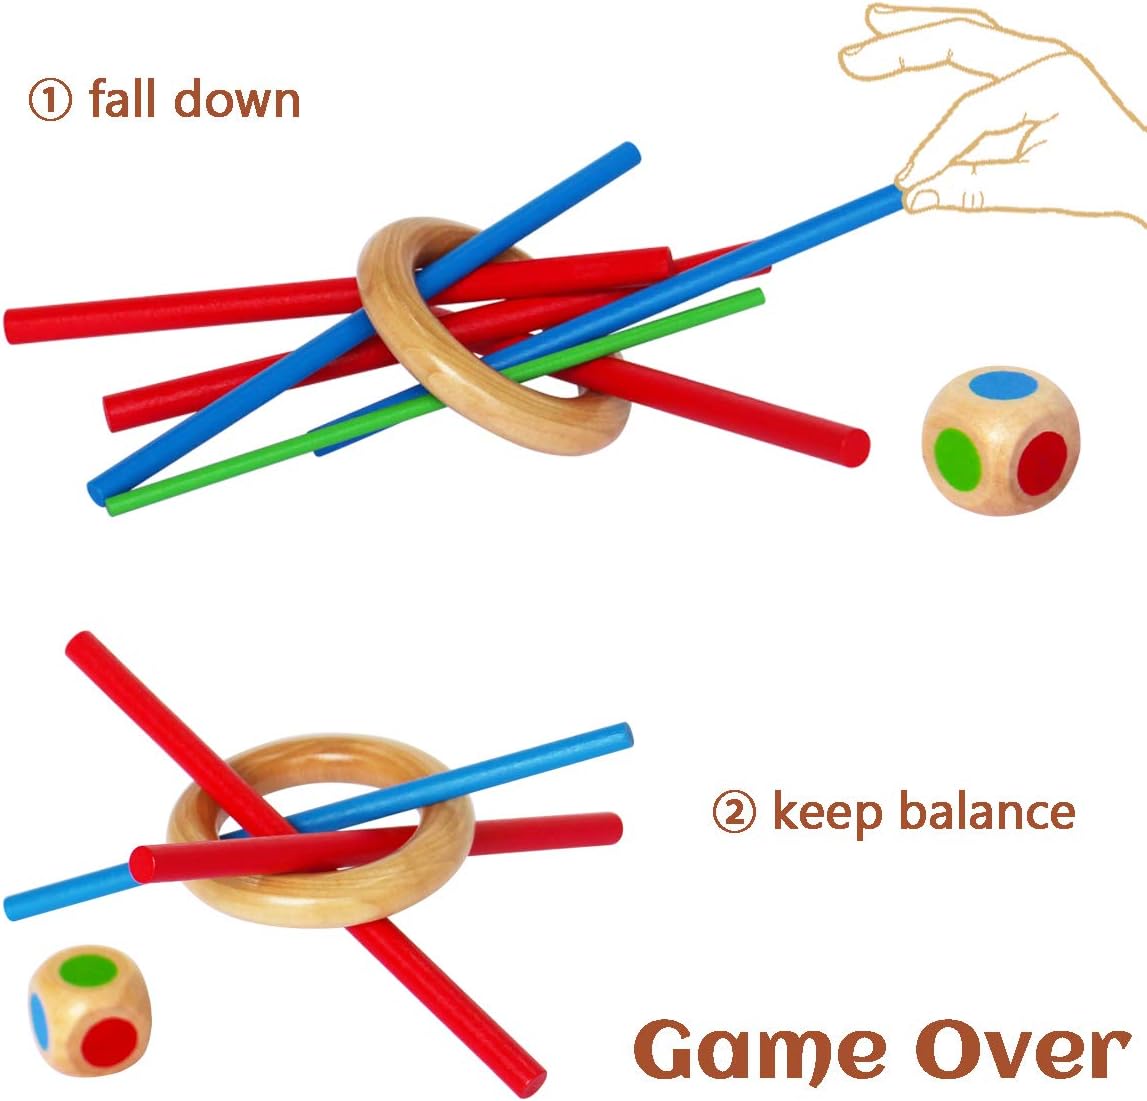 Keep It Steady Fun Family Games for Kids and Adults - Balance & Patience Training - Wooden Stick Toys for Creative Kids Games